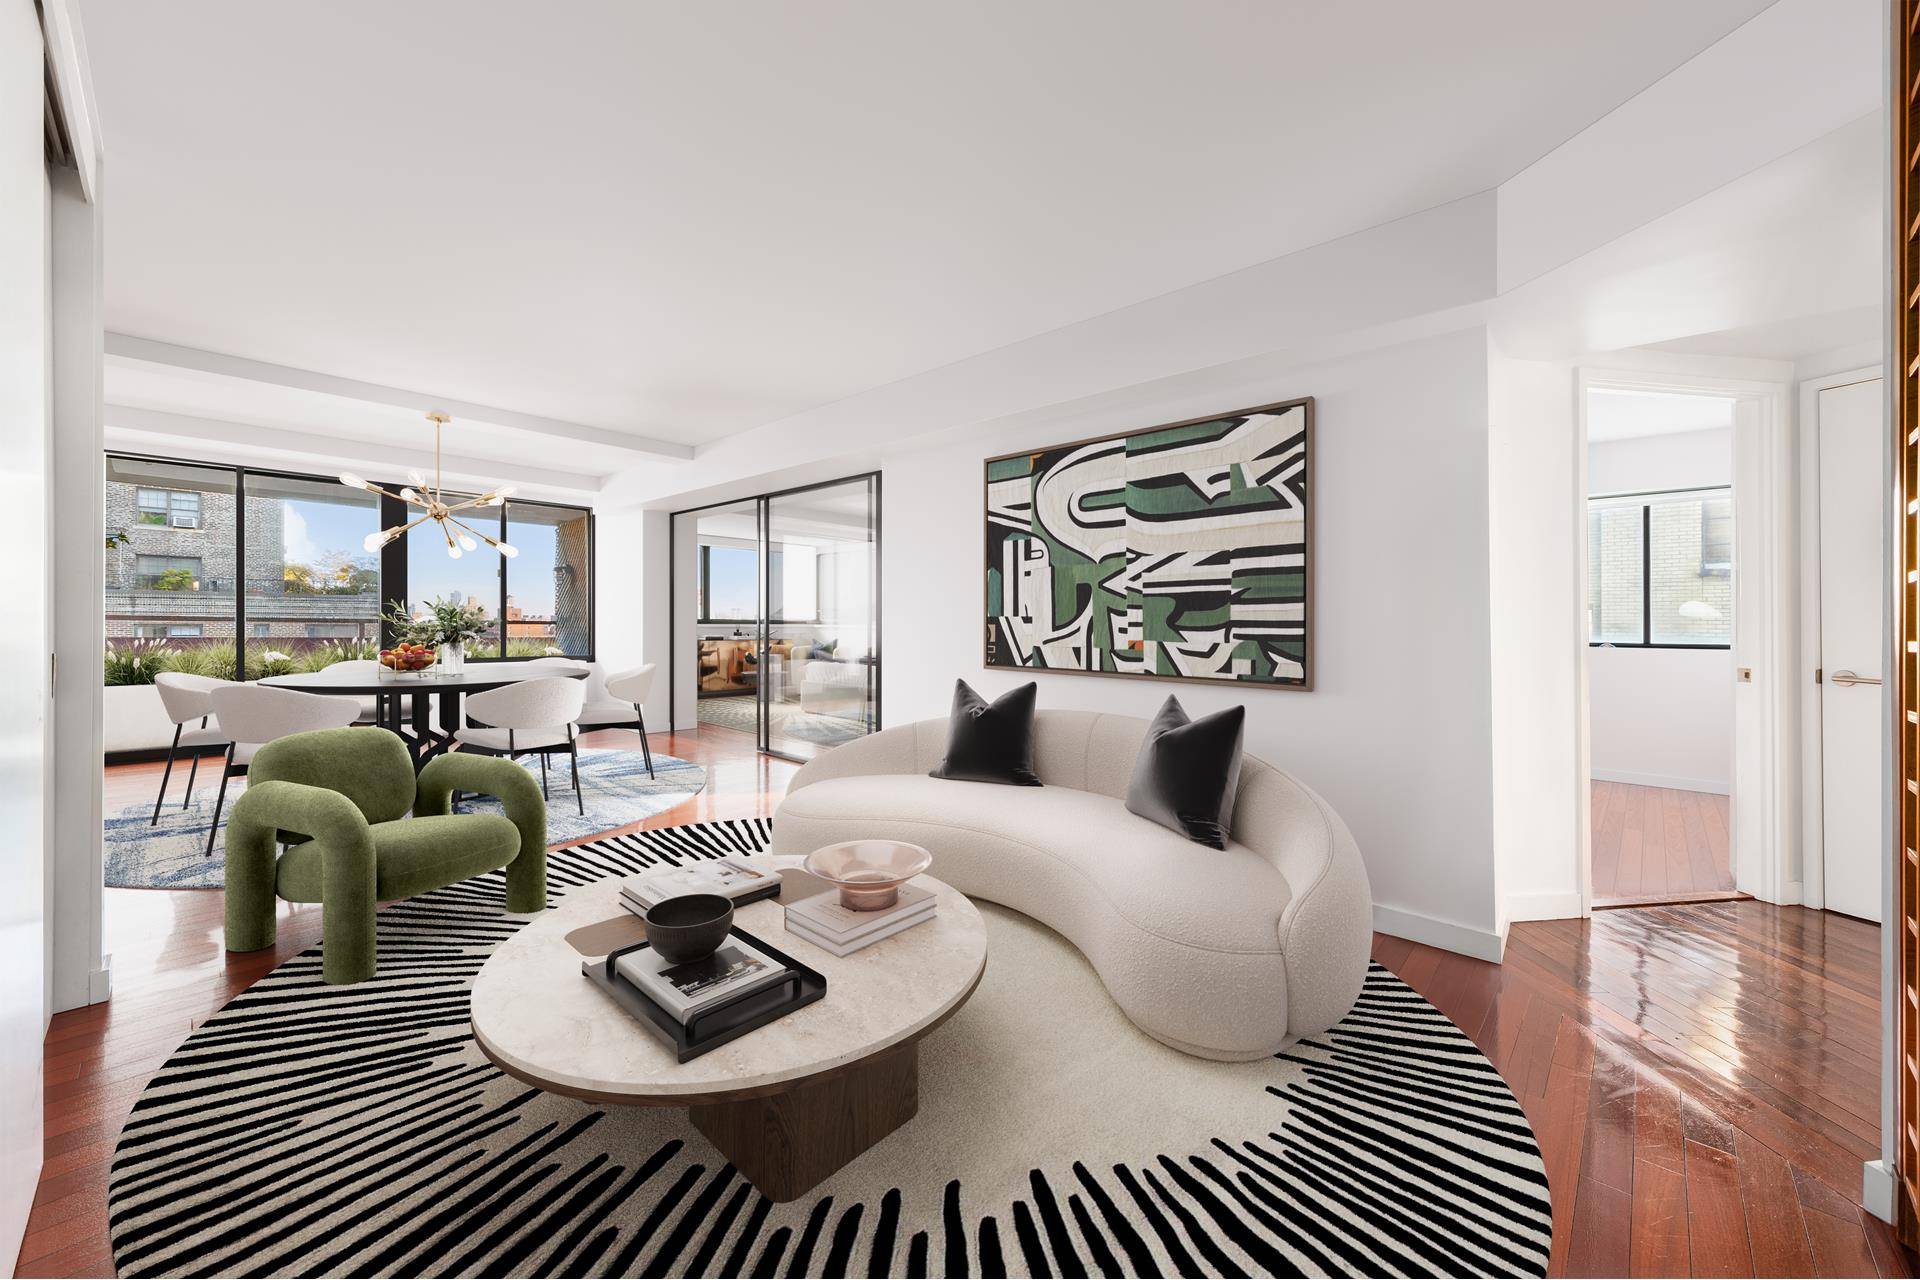 Welcome to the Epitome of Gramercy Luxury Apartment 19F at 142 East 16th Street.